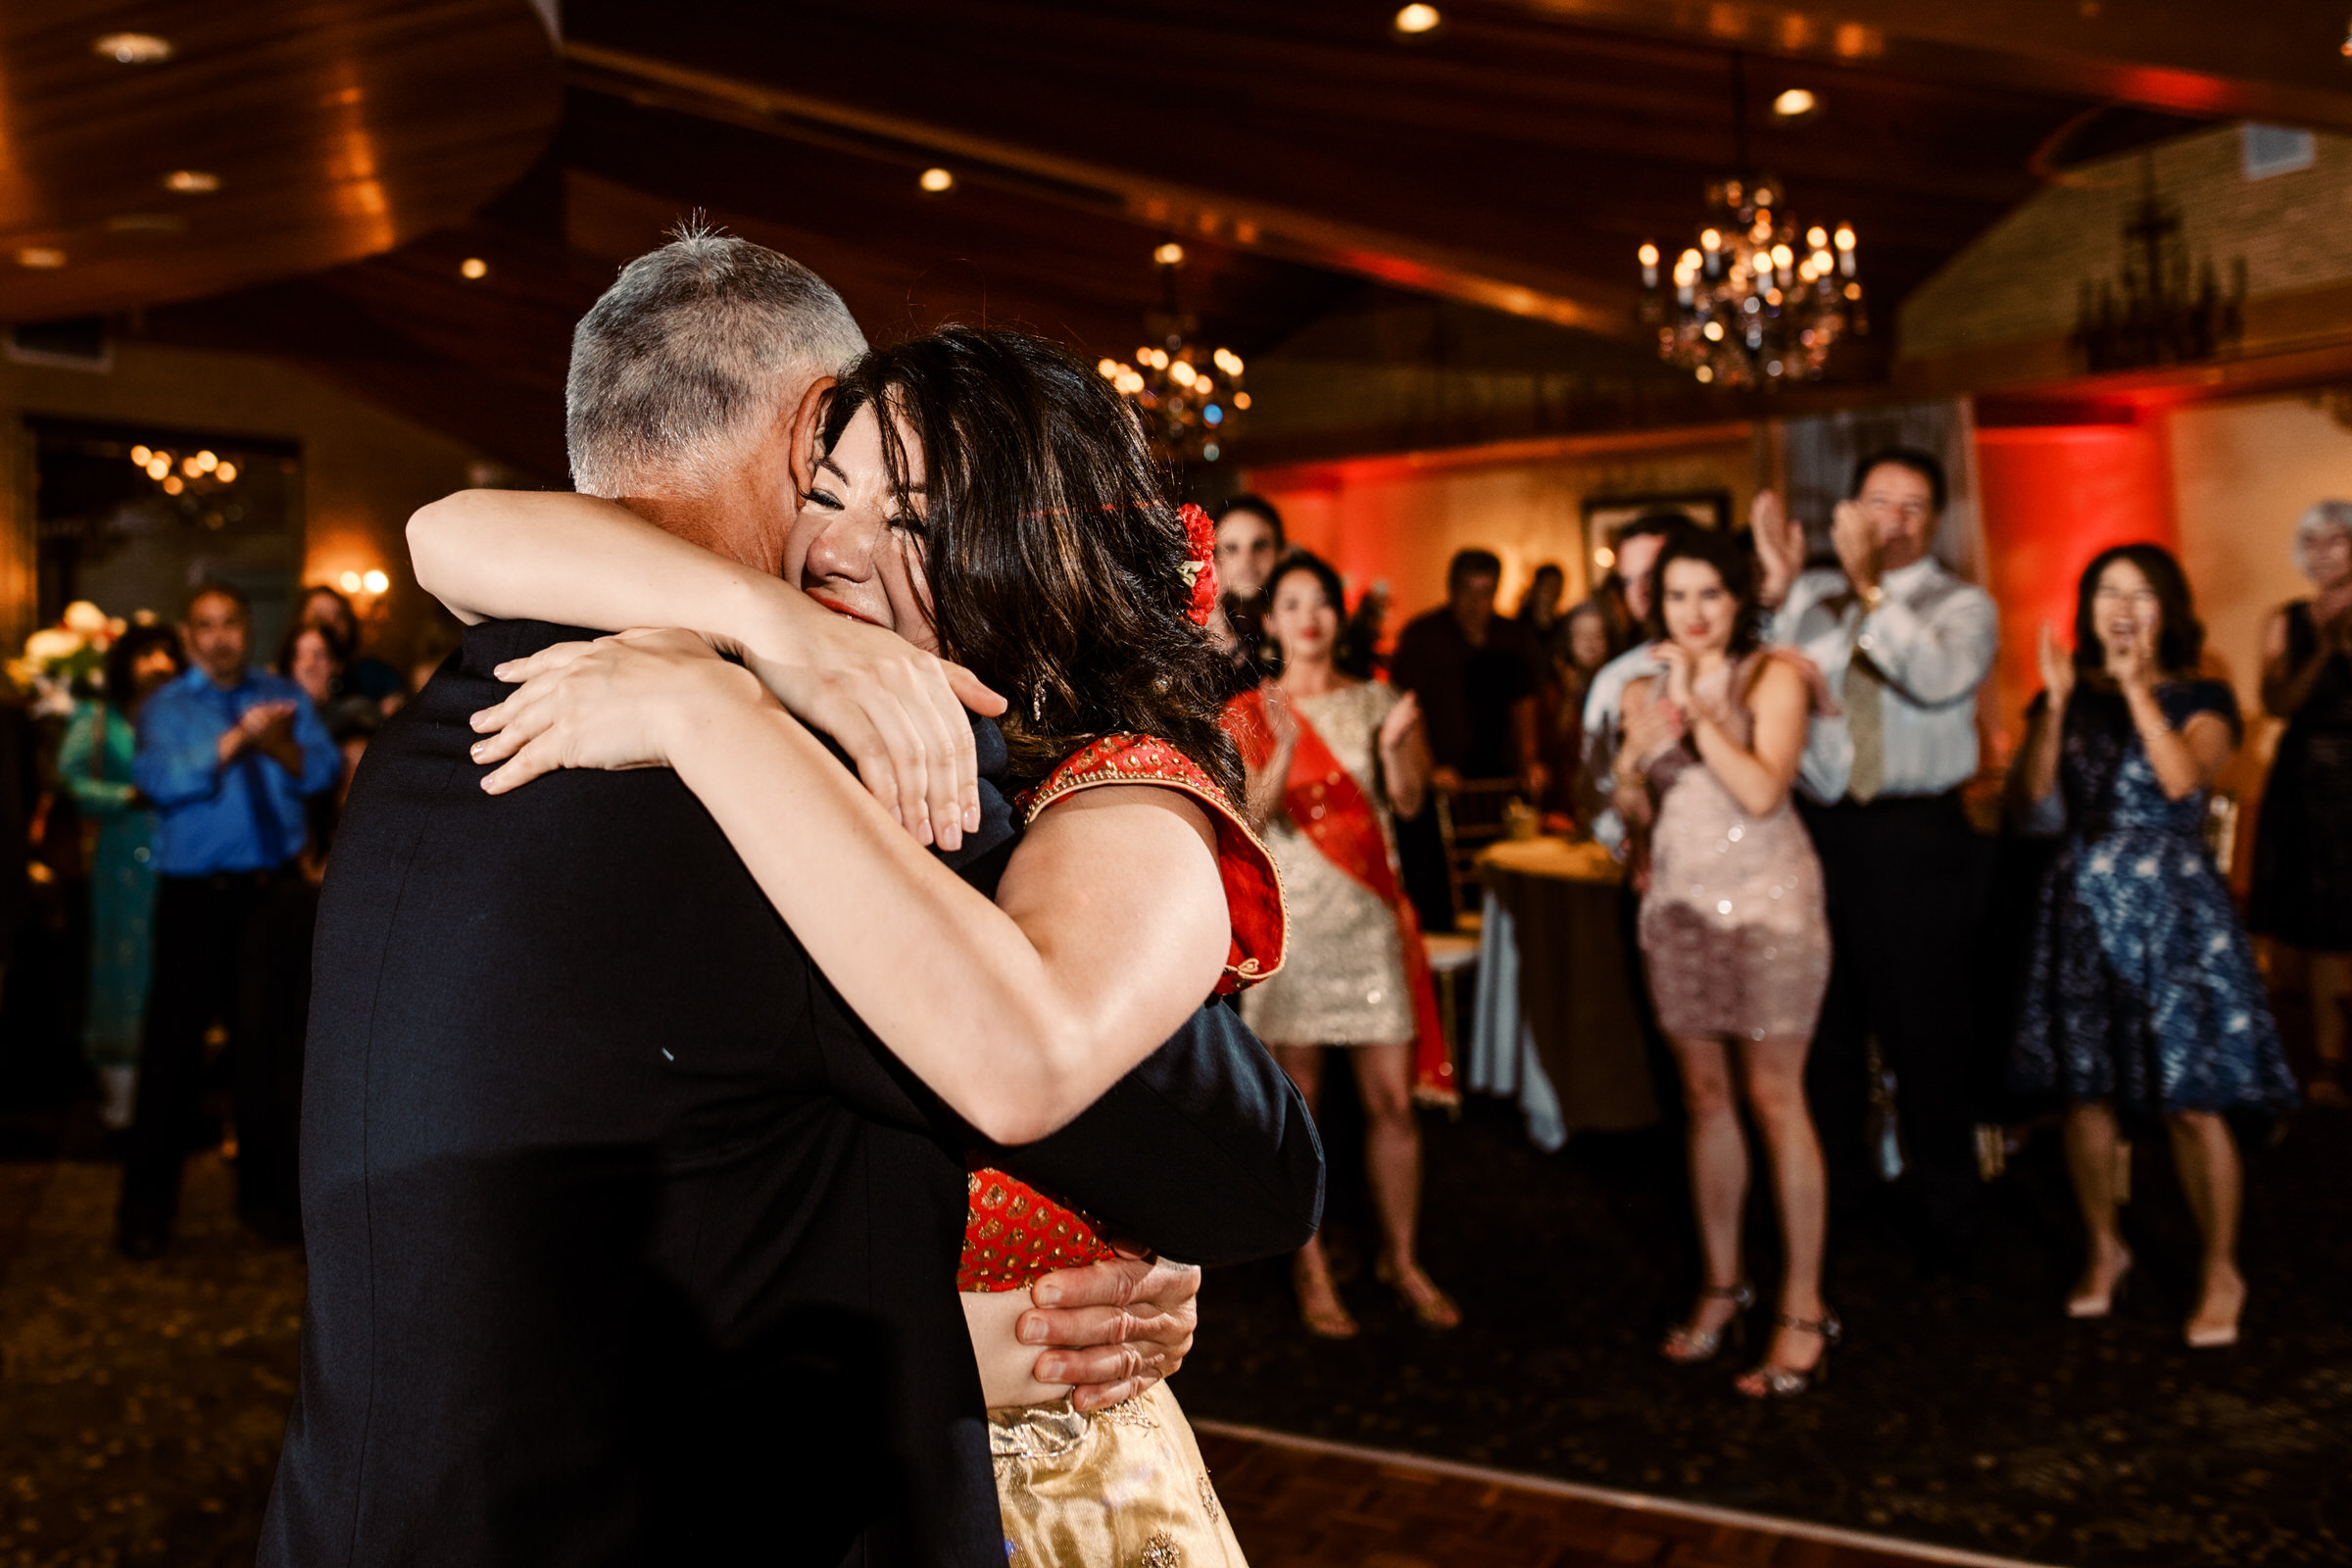 Kelly dances with her dad at her wedding